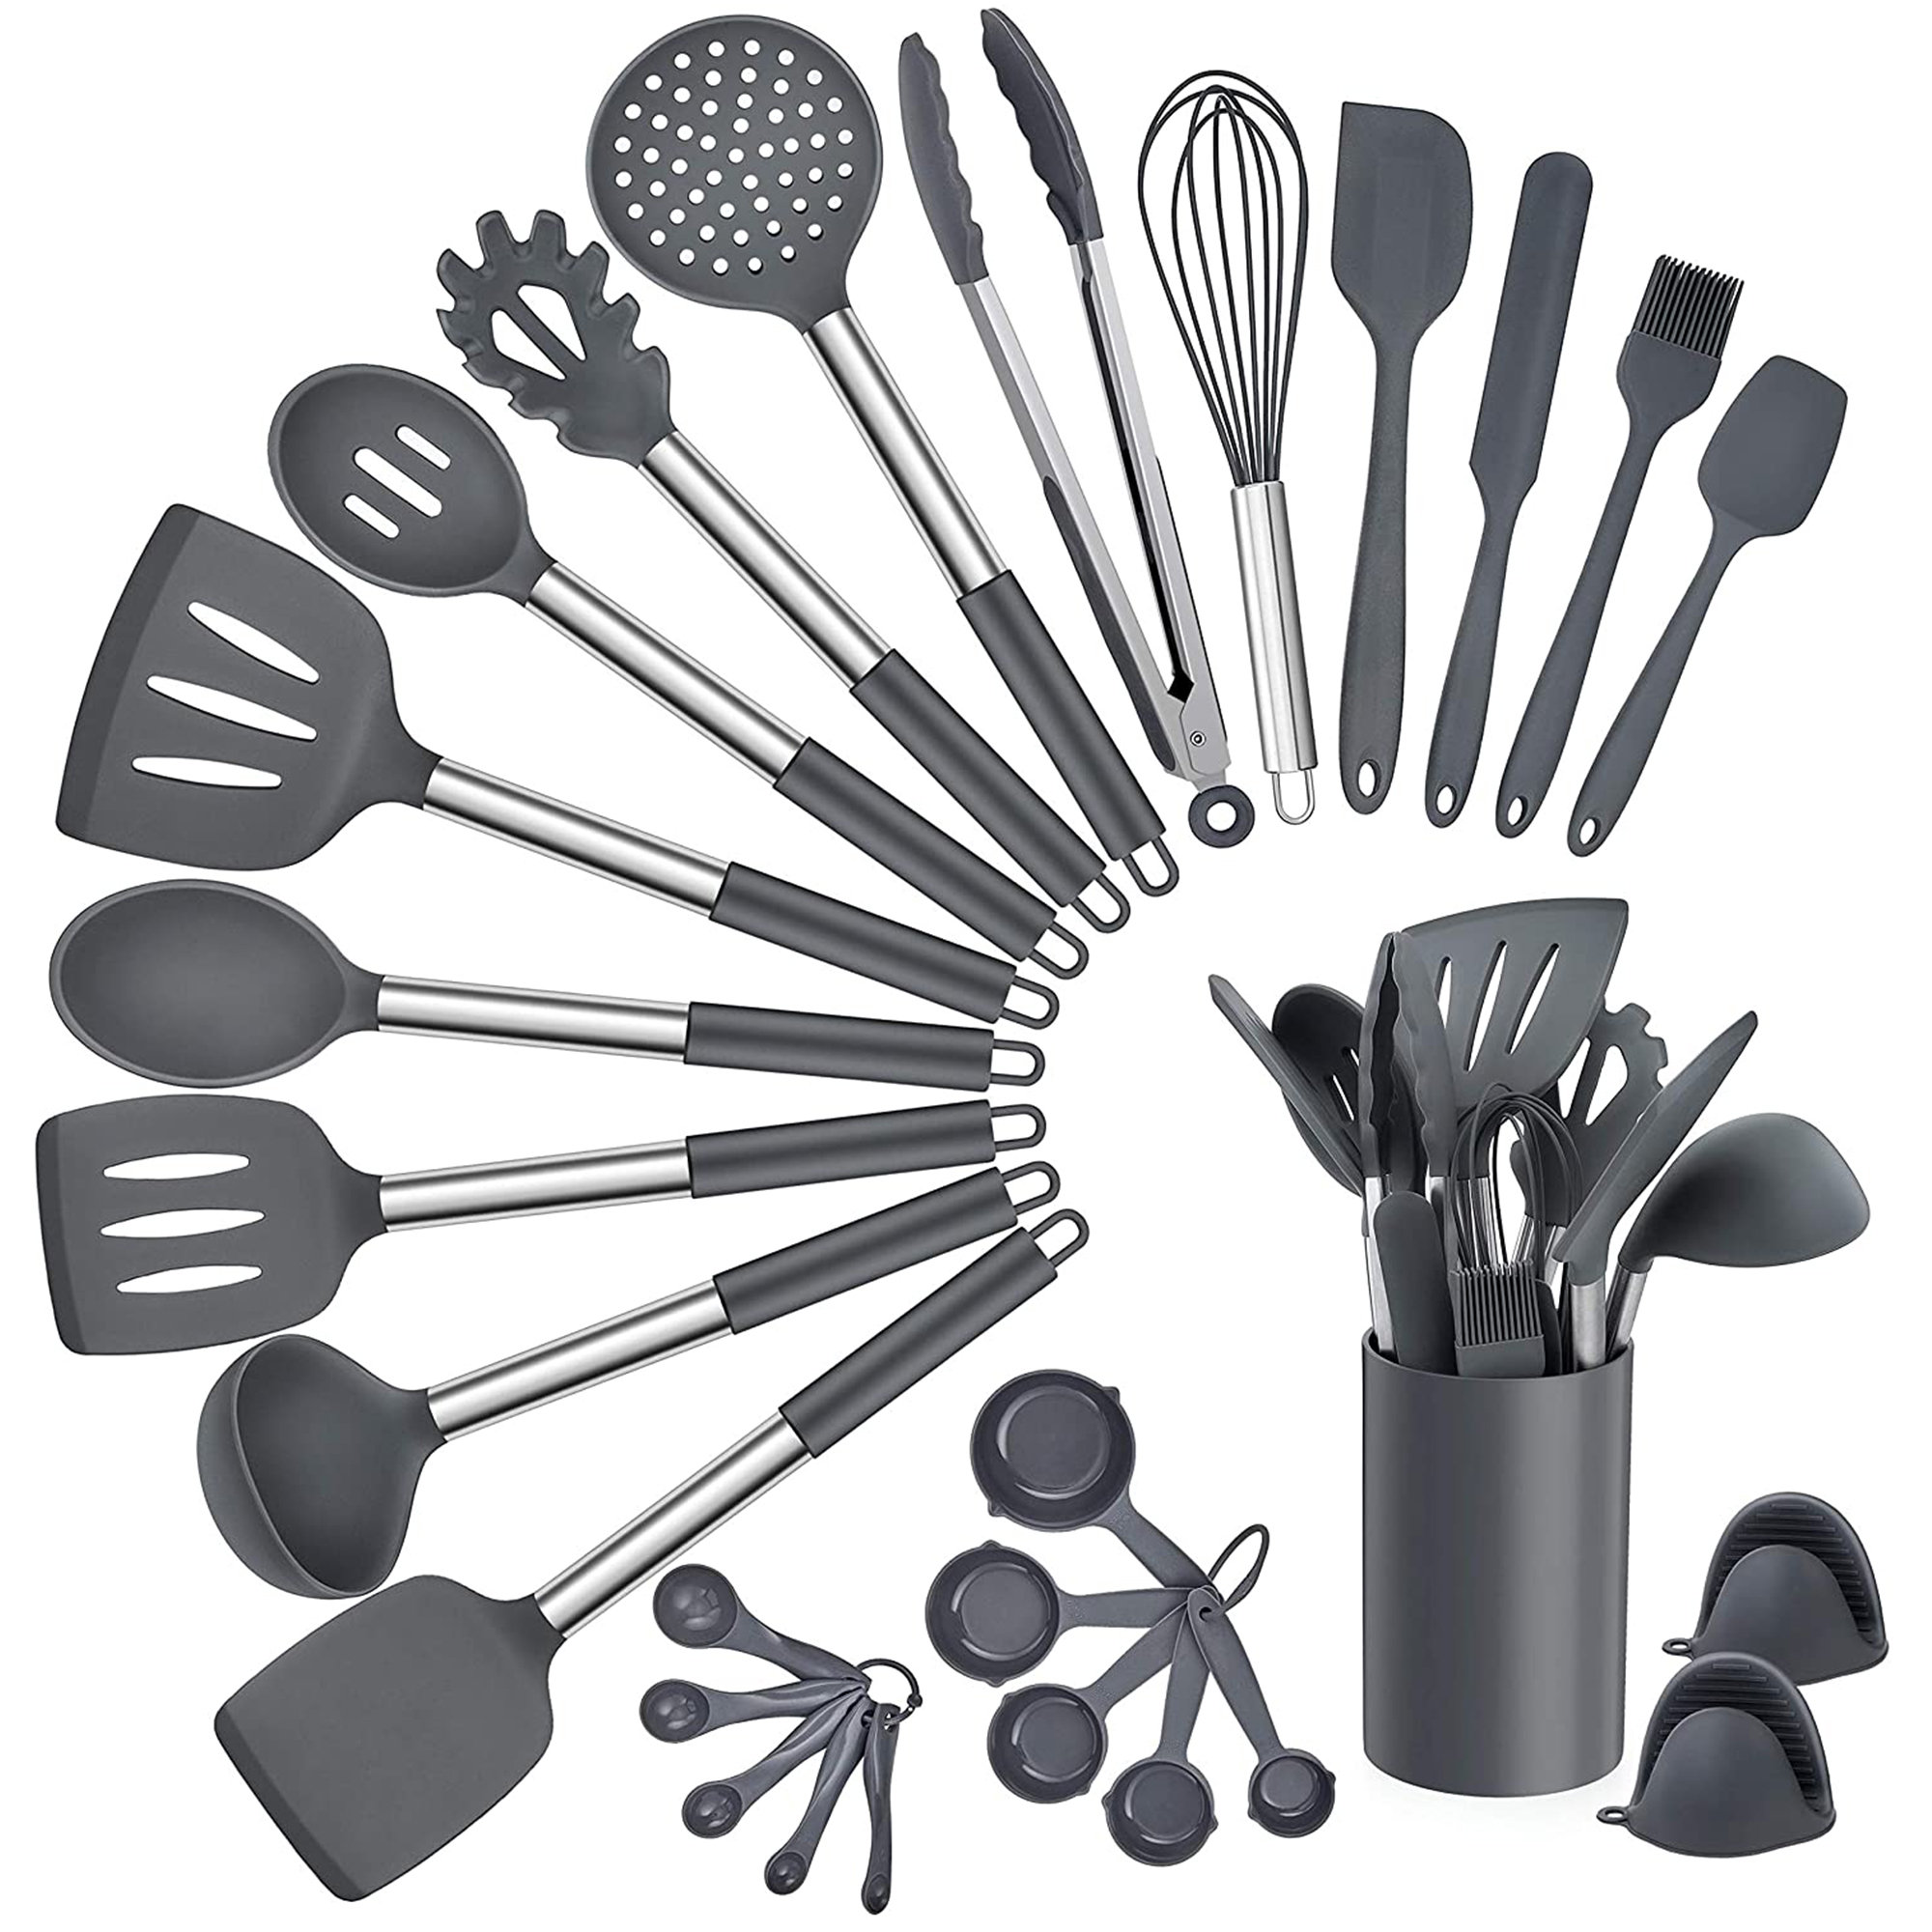 Nutrichef 10 PCS. Silicone Heat Resistant Kitchen Cooking Utensils Set - Non-Stick Baking Tools with PP Holder (Gray & Black)